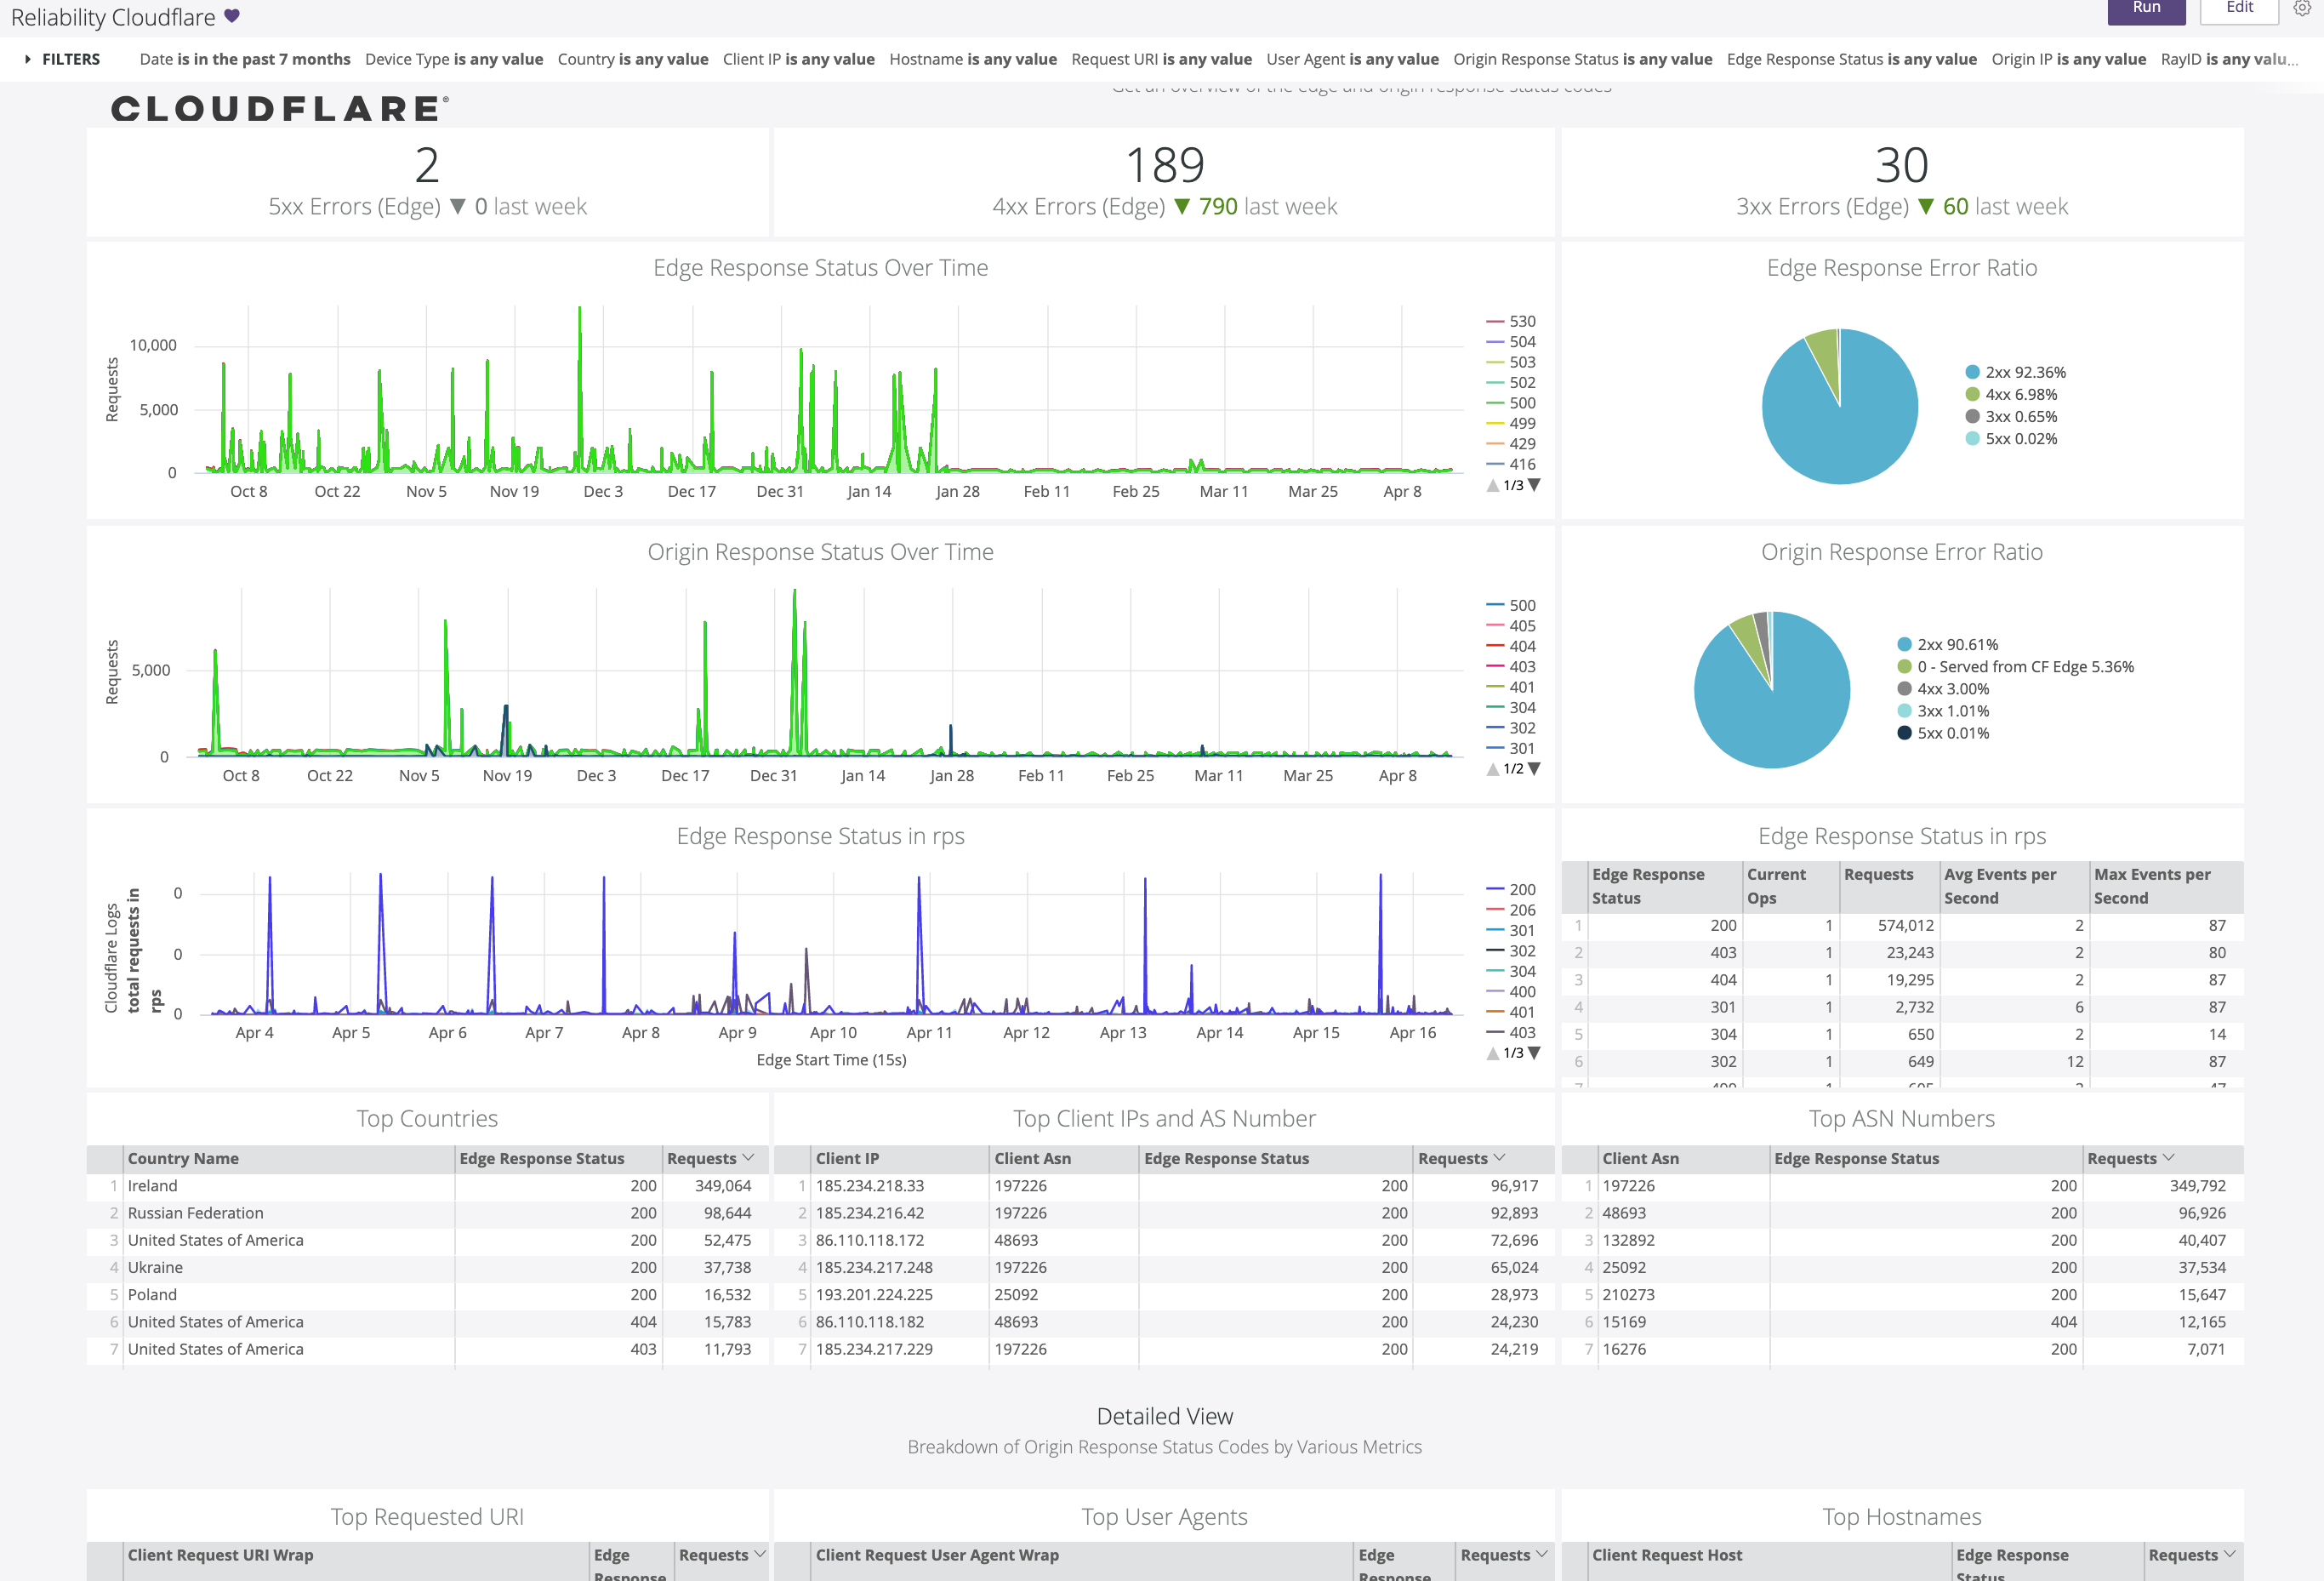 Looker dashboard highlighting Cloudflare metrics including Edge and Origin Response Status Over time and Error Ratios